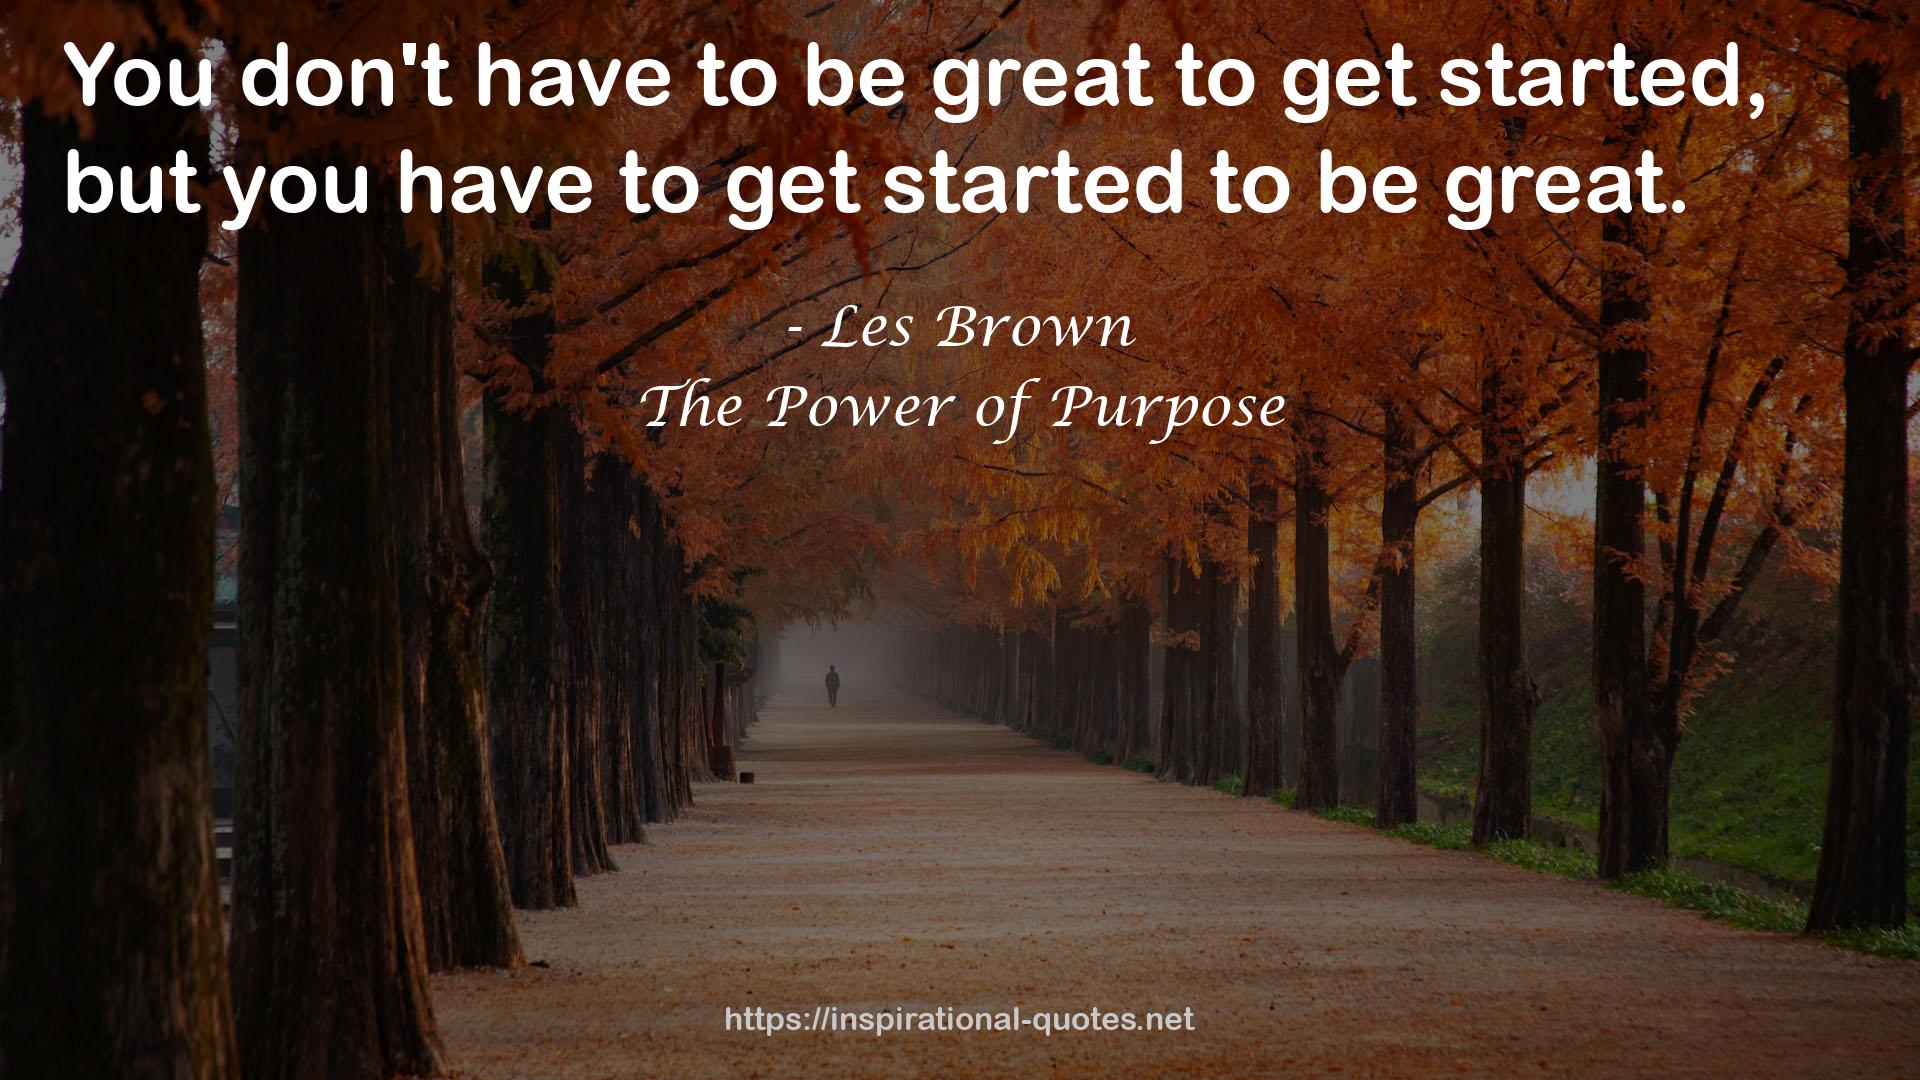 The Power of Purpose QUOTES